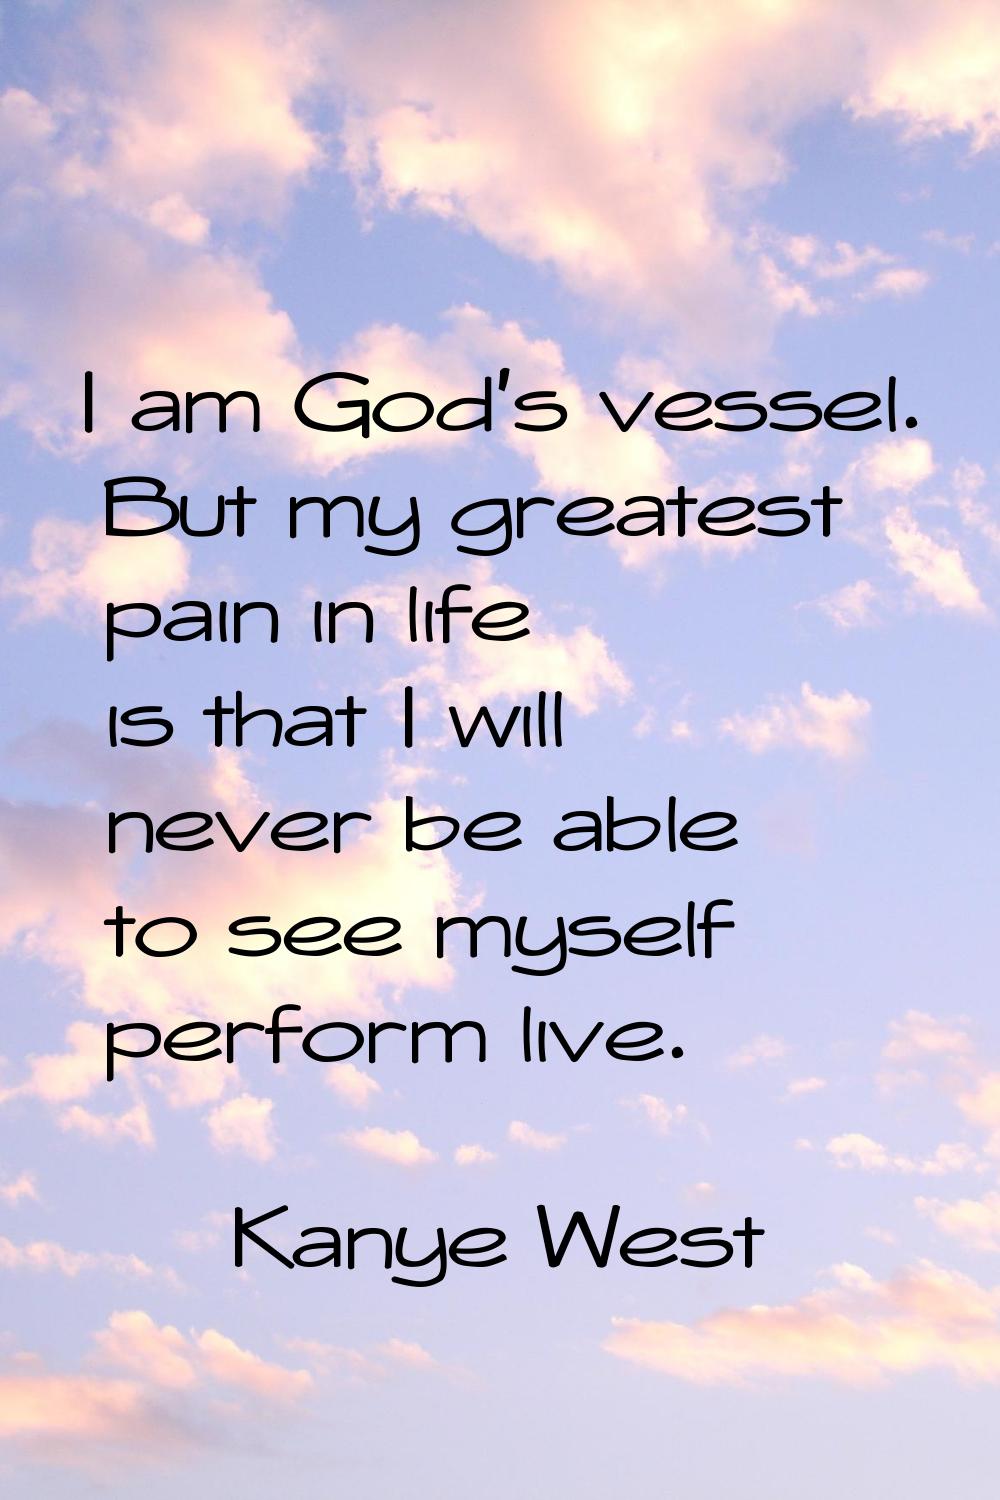 I am God's vessel. But my greatest pain in life is that I will never be able to see myself perform 